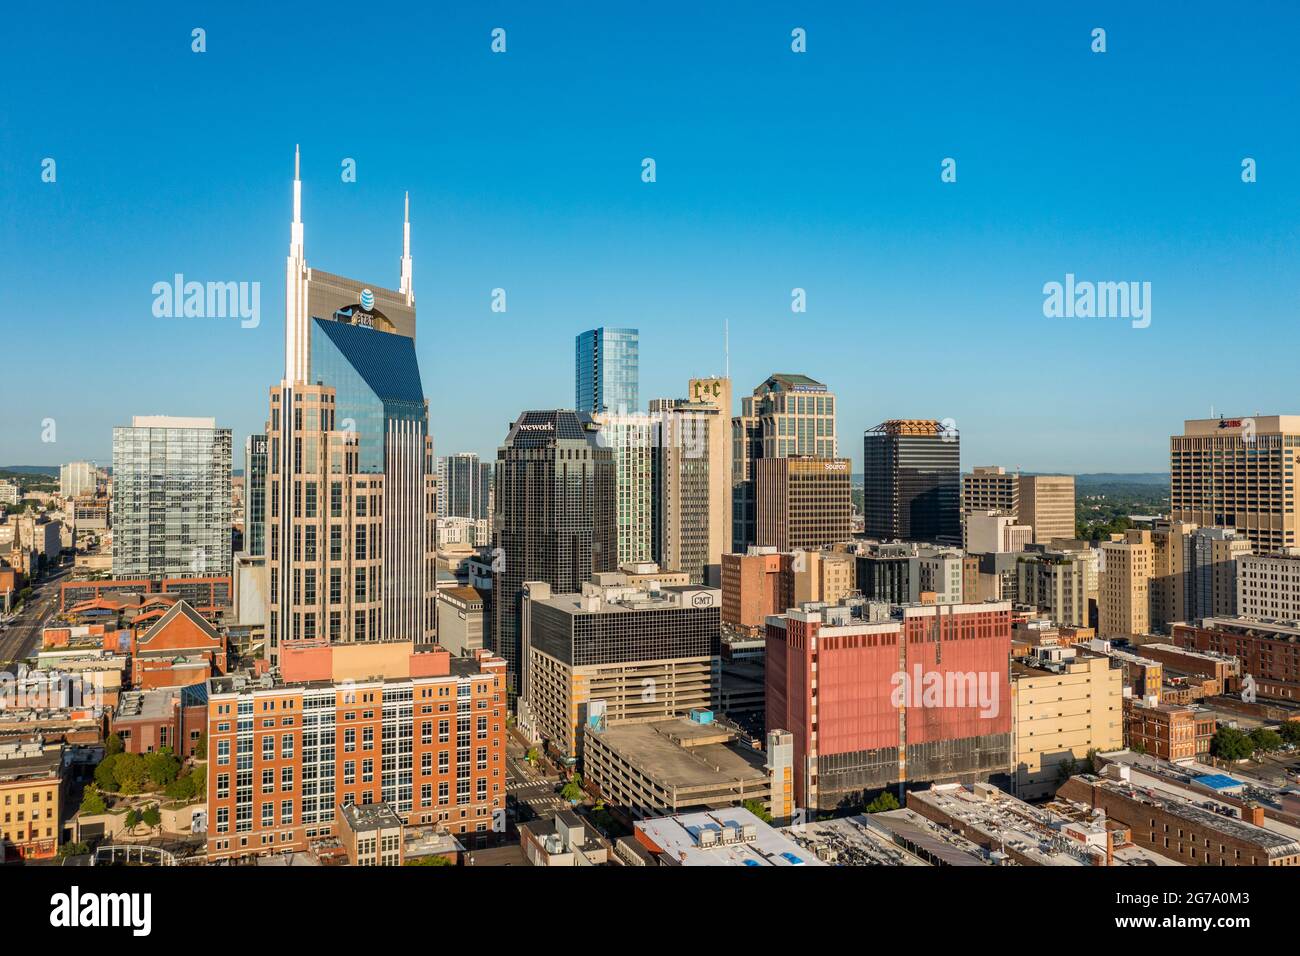 Nashville, Tennessee - 28 June 2021: Aerial drone view of the financial downtown district of Nashville Stock Photo